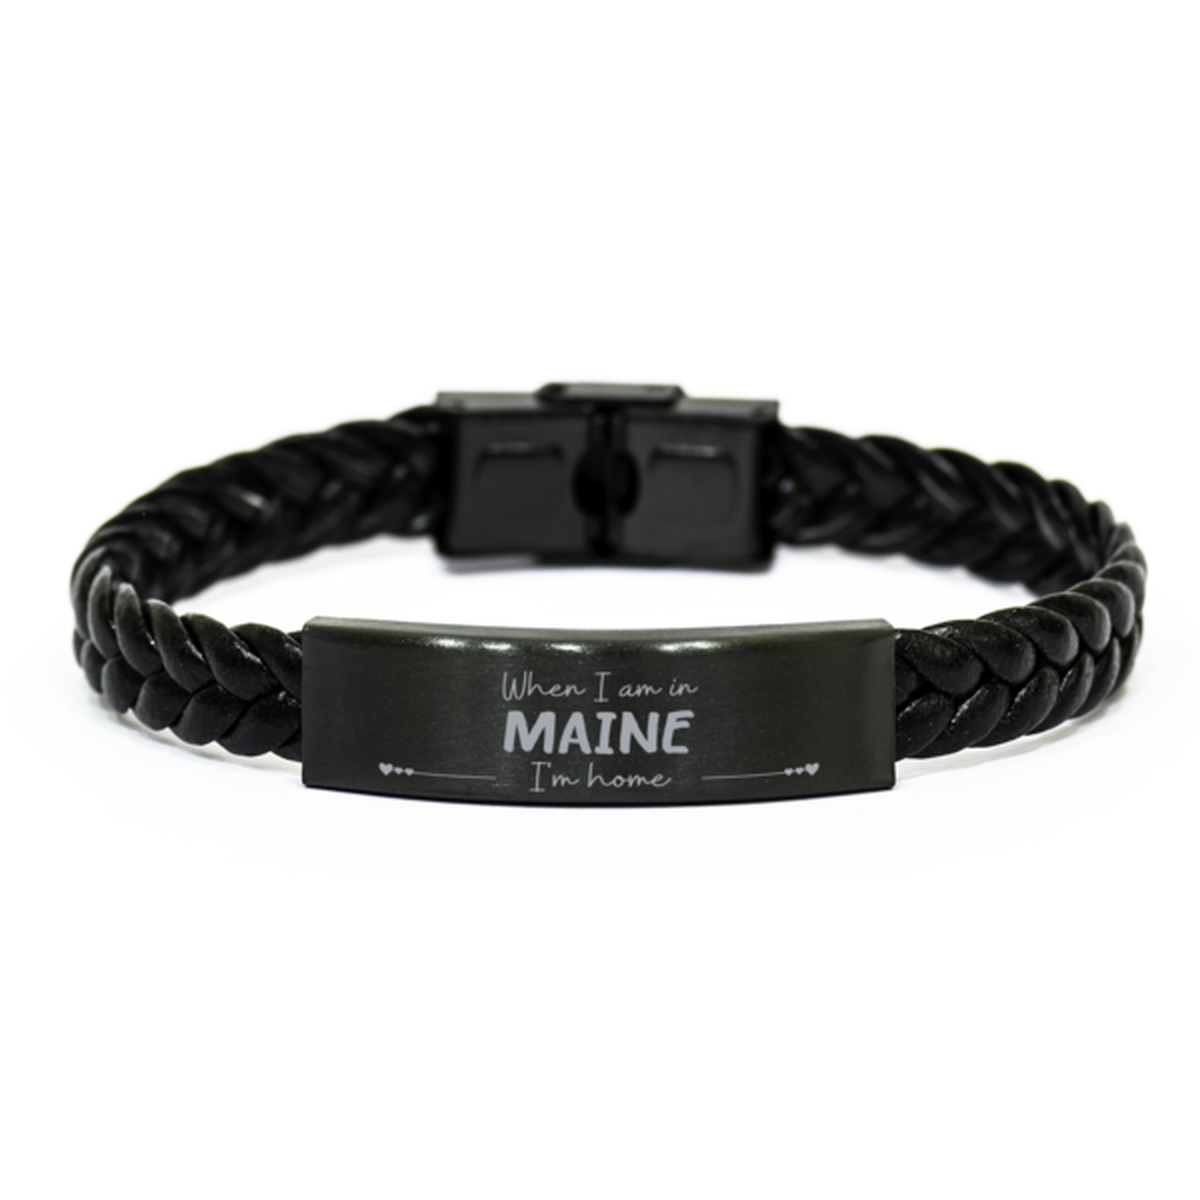 When I am in Maine I'm home Braided Leather Bracelet, Cheap Gifts For Maine, State Maine Birthday Gifts for Friends Coworker